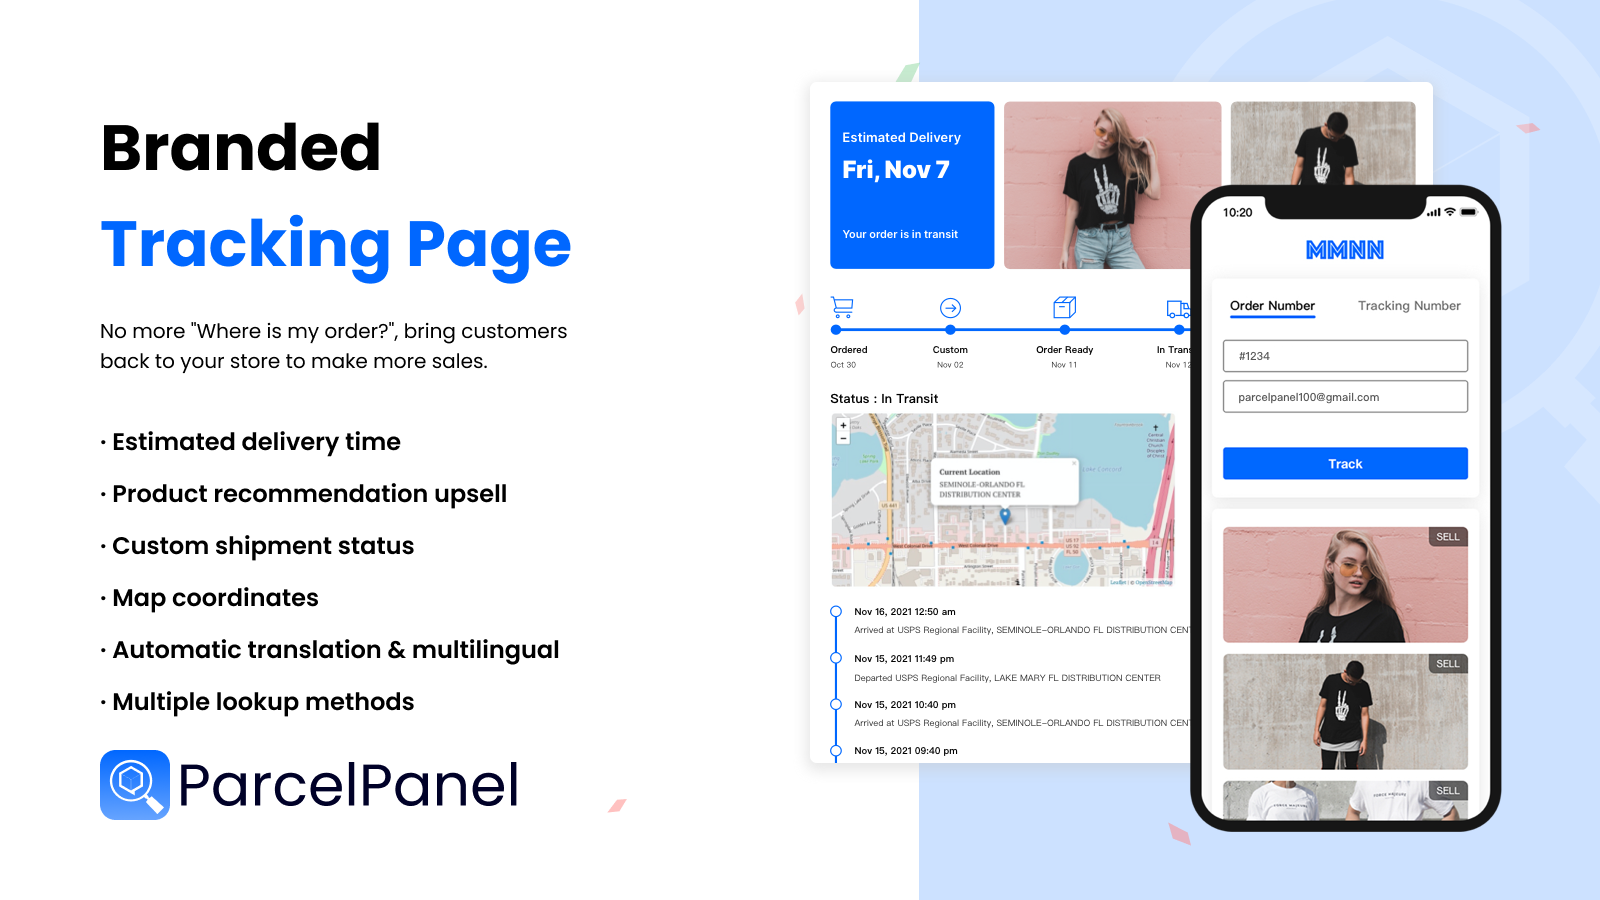 Parcel Panel branded tracking page